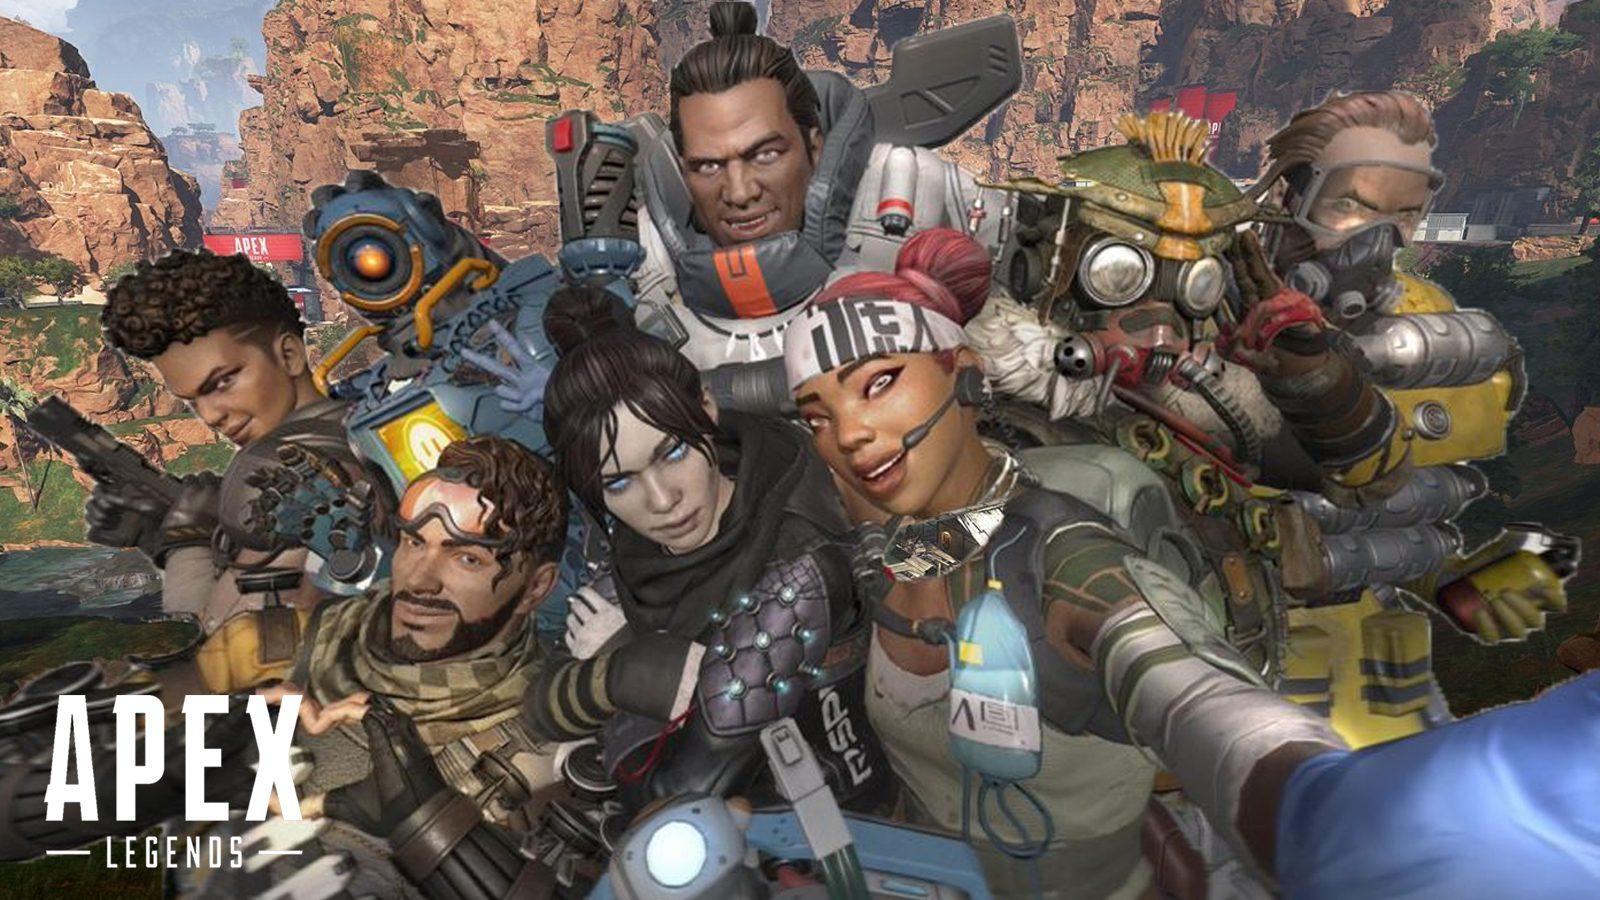 image of all 10 unreleased Apex Legends characters leaked